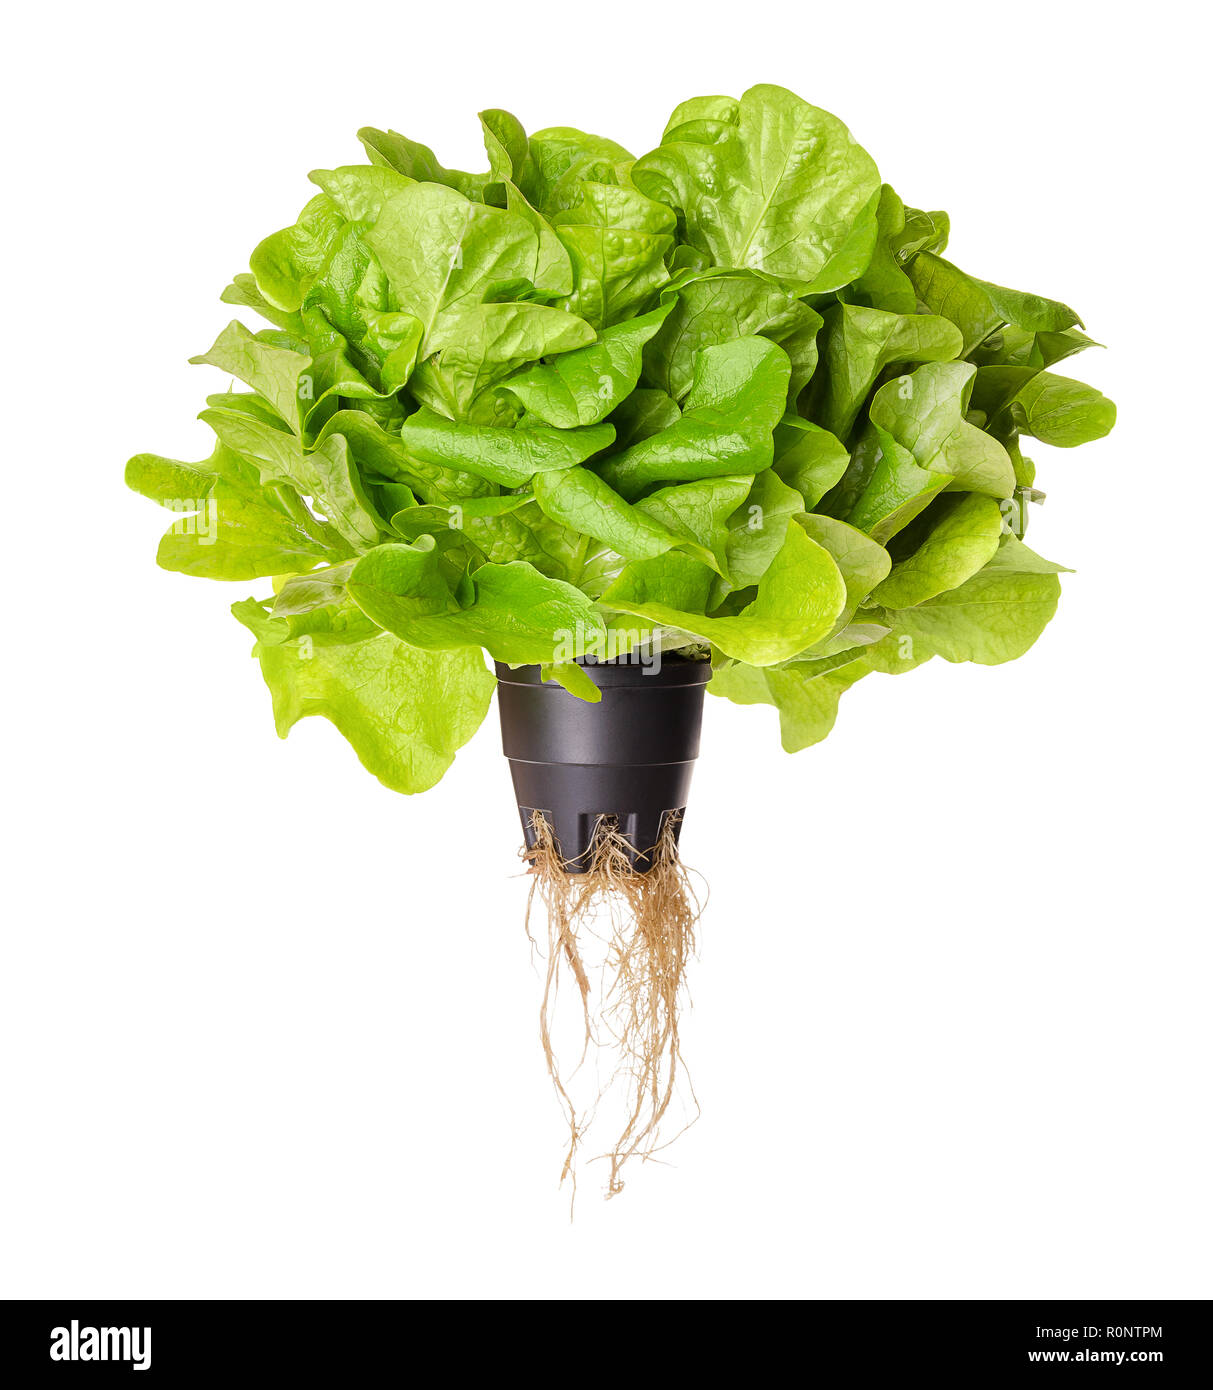 Salanova Green, living salad, front view. Oak leaf lettuce in plastic pot with roots. One cut ready, loose leaf lettuce. Stock Photo